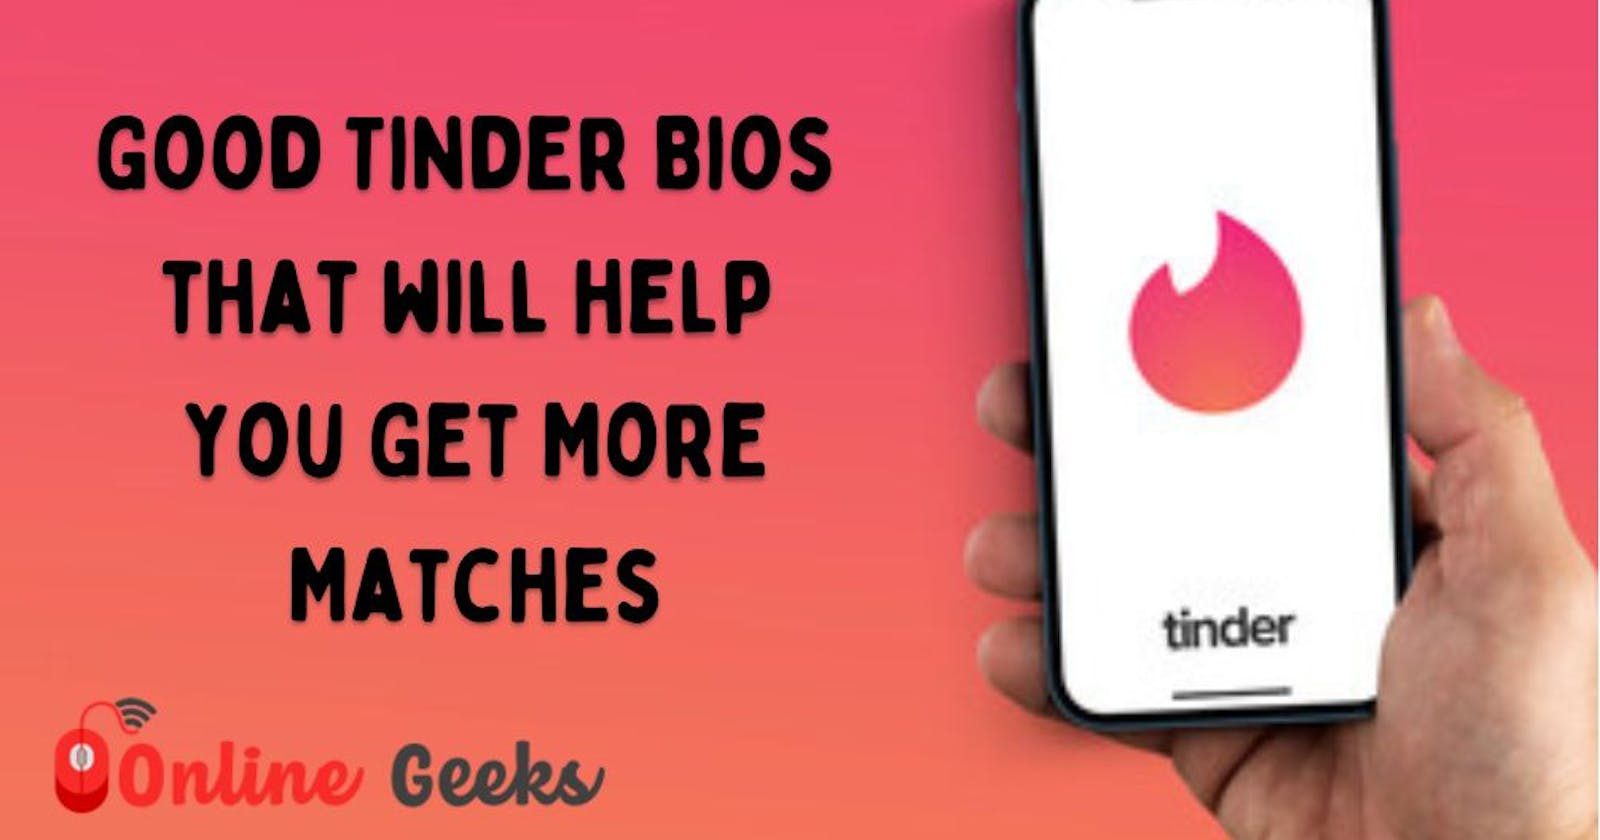 Good Tinder Bios that will help you Get More Matches